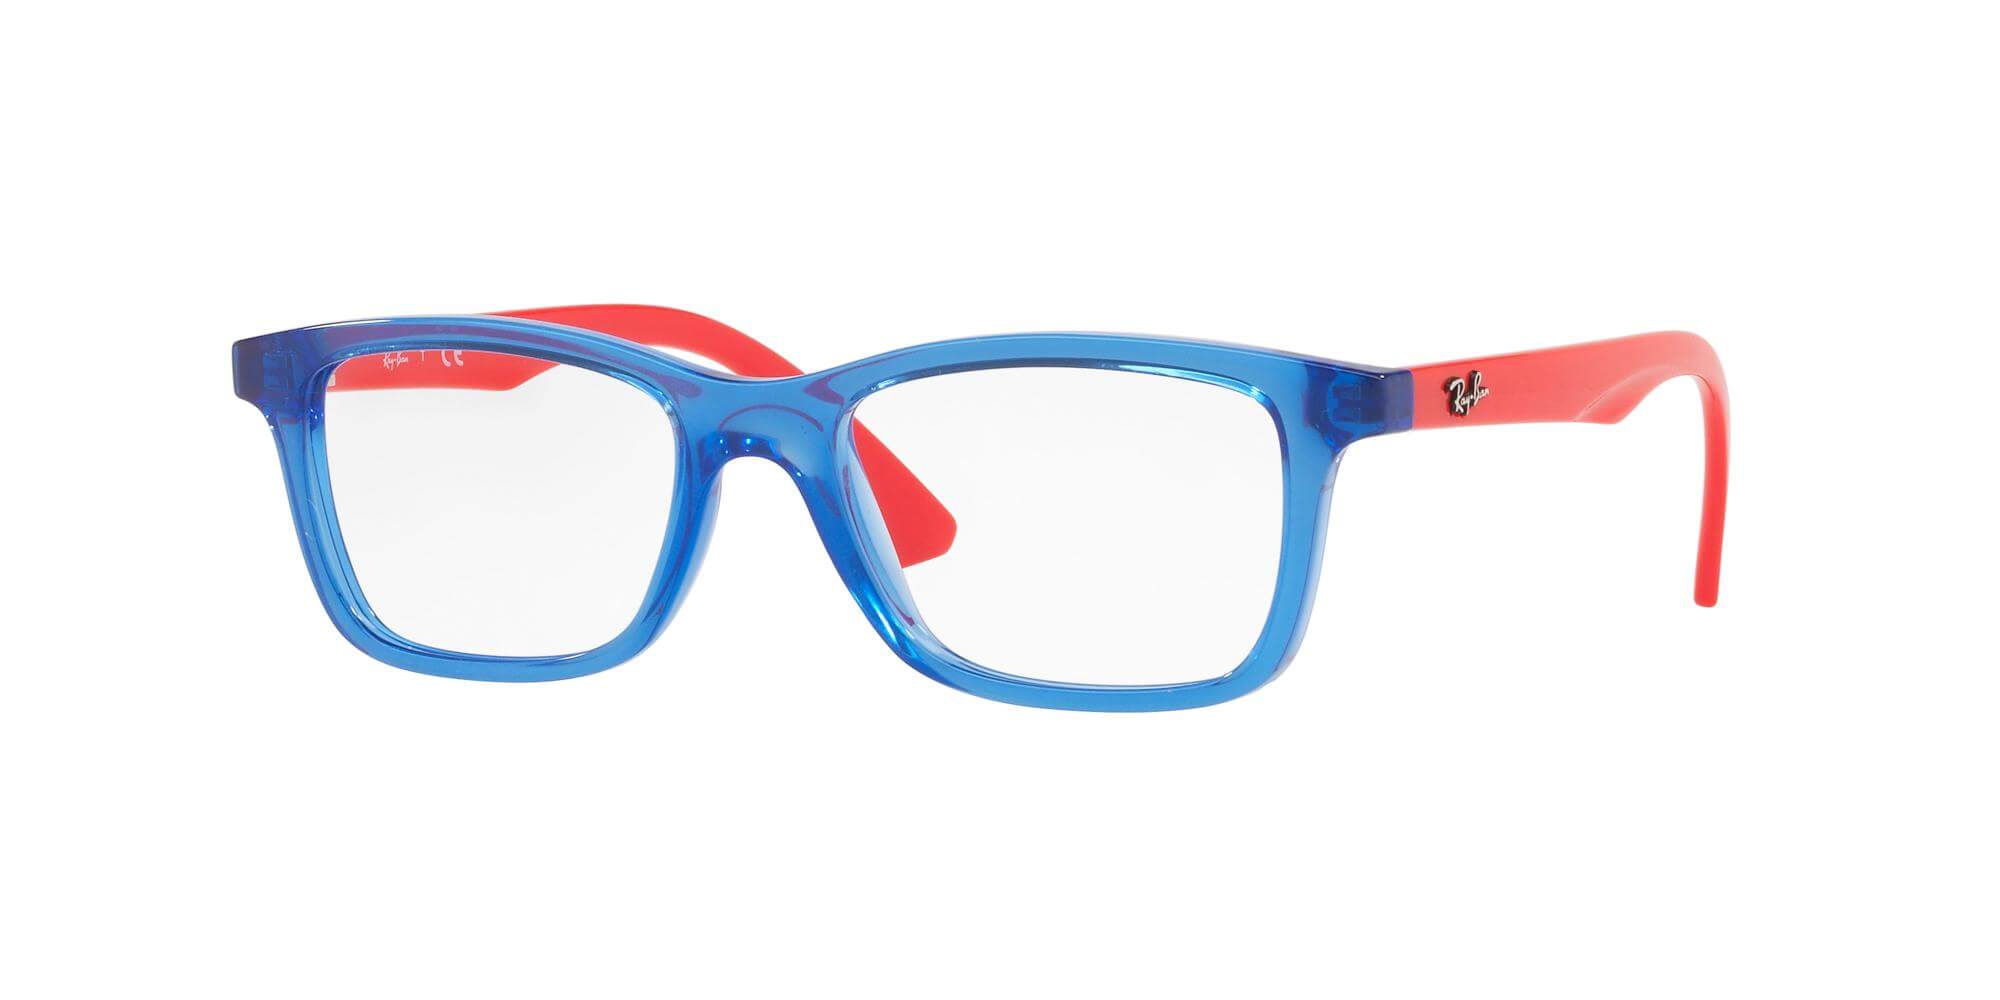 Ray-Ban JuniorRY 1562Light Blue Red (3746)